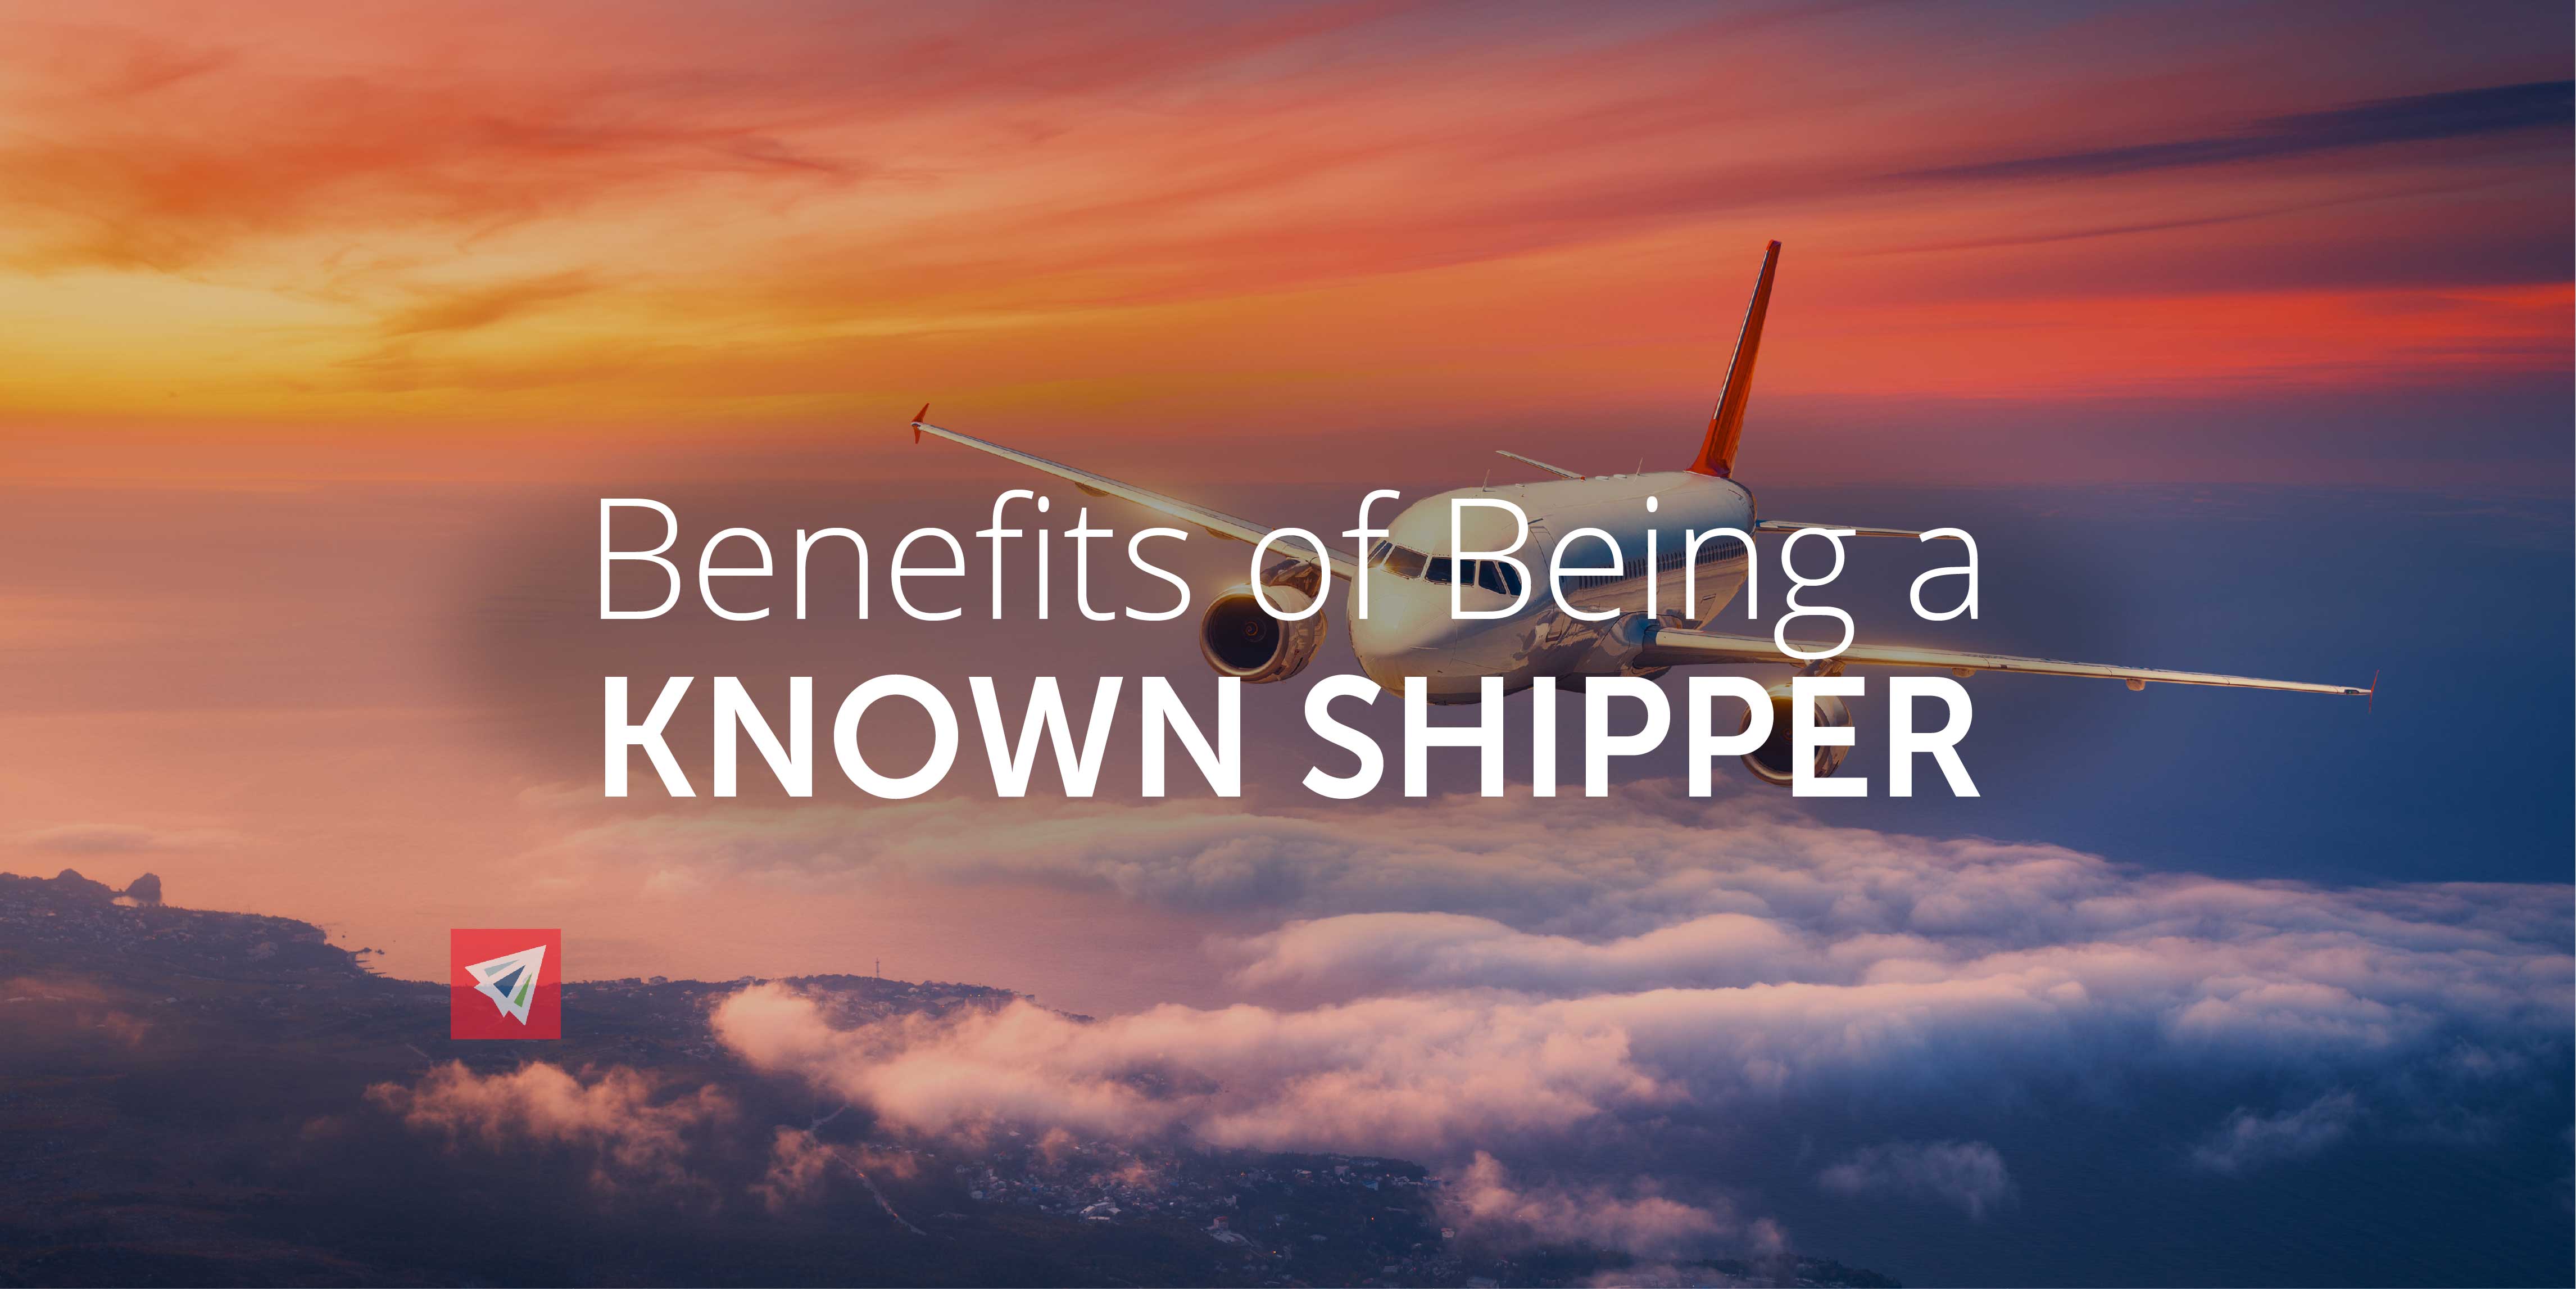 Benefits of Being a Known Shipper